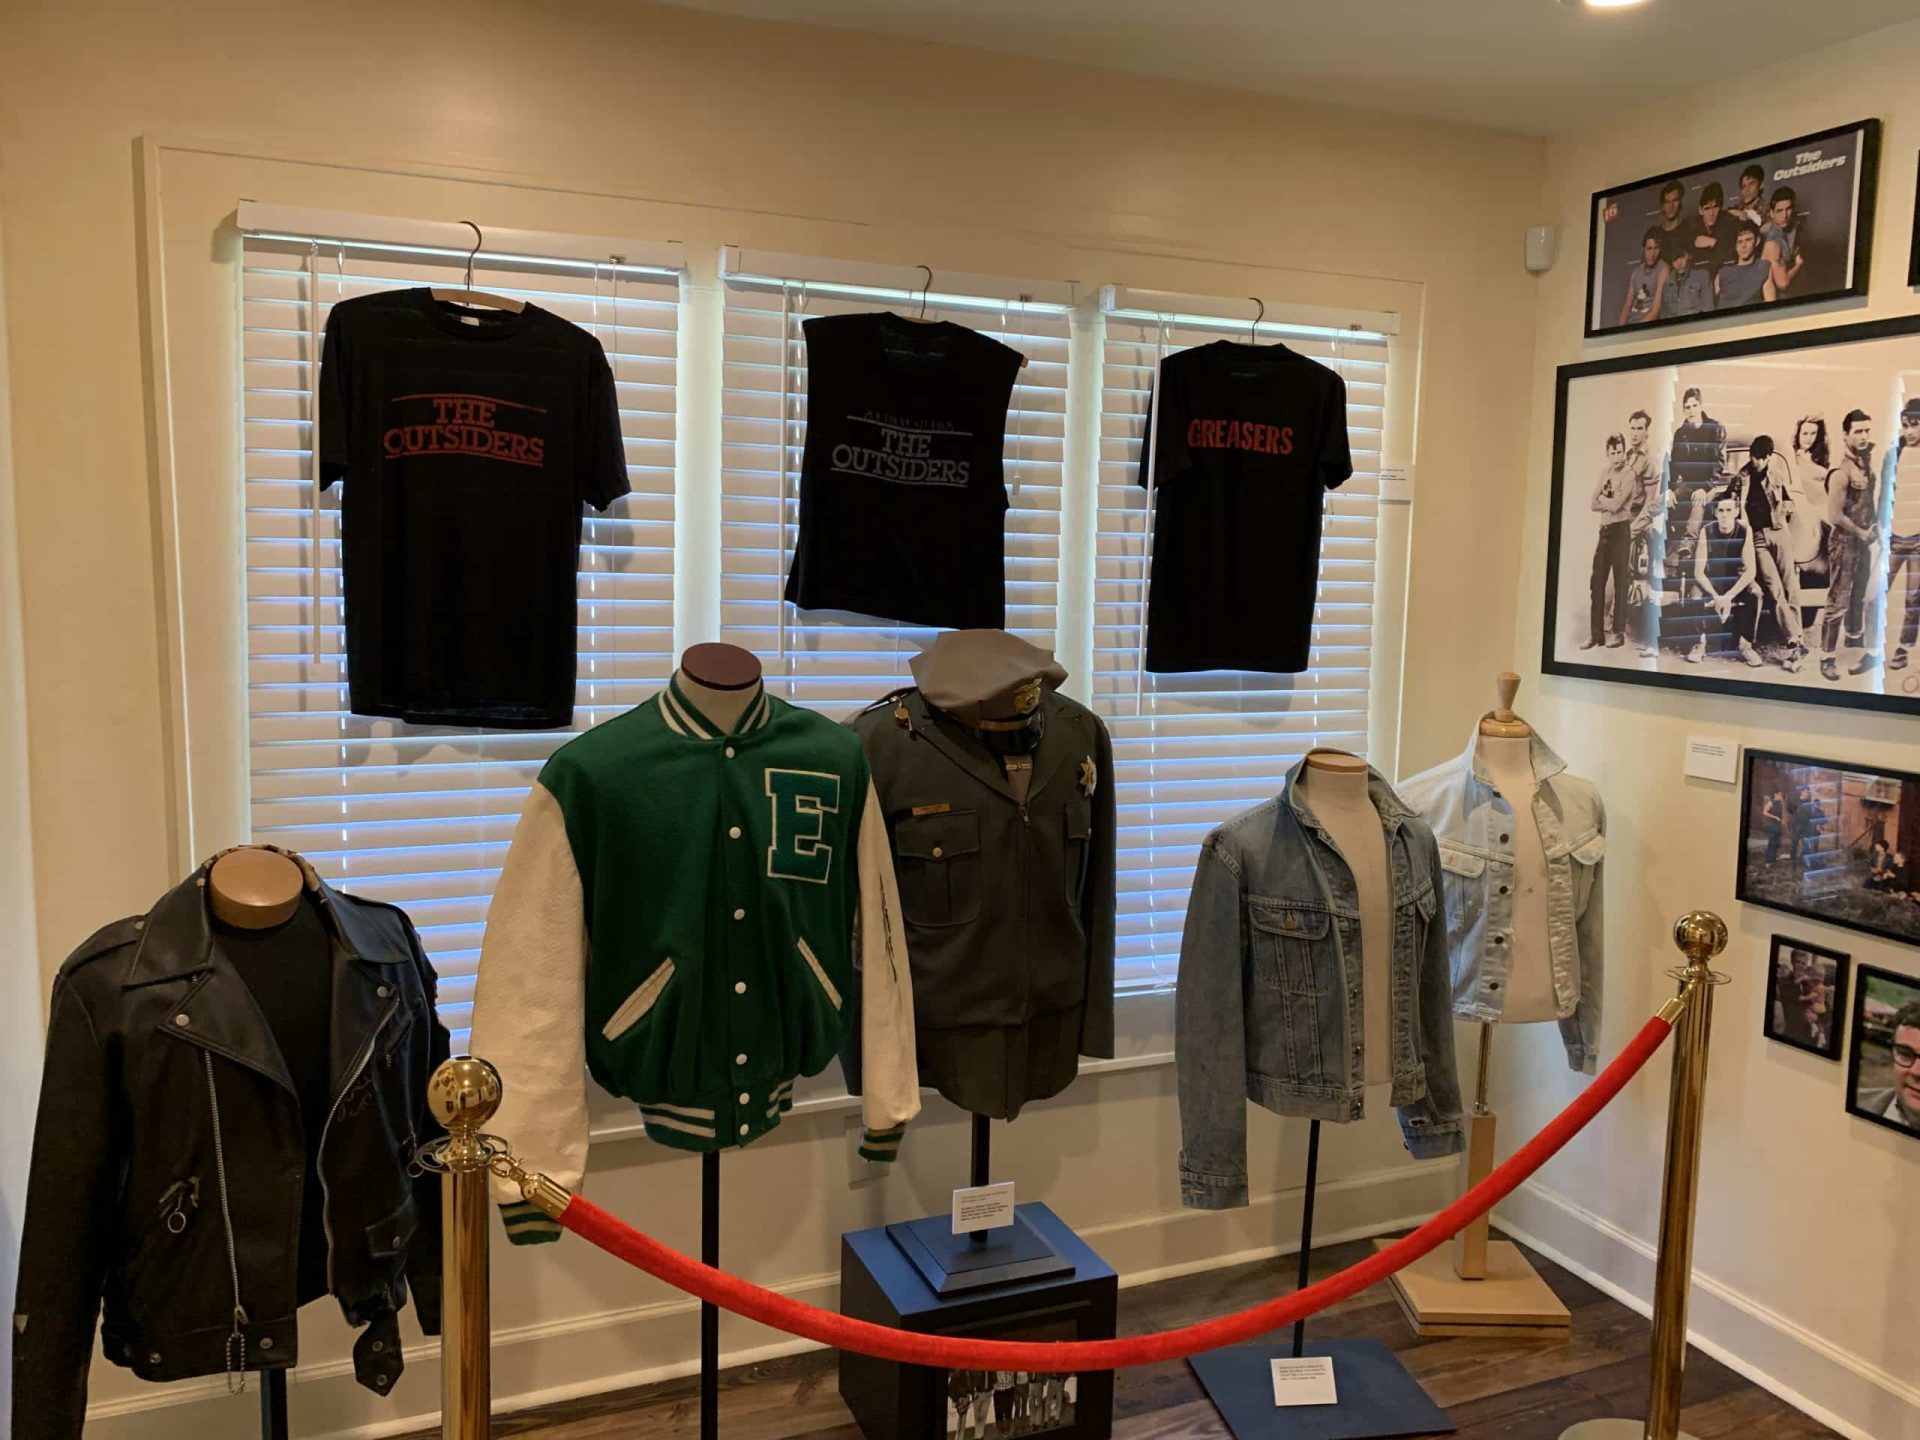 Cloths from the Outsiders Movie